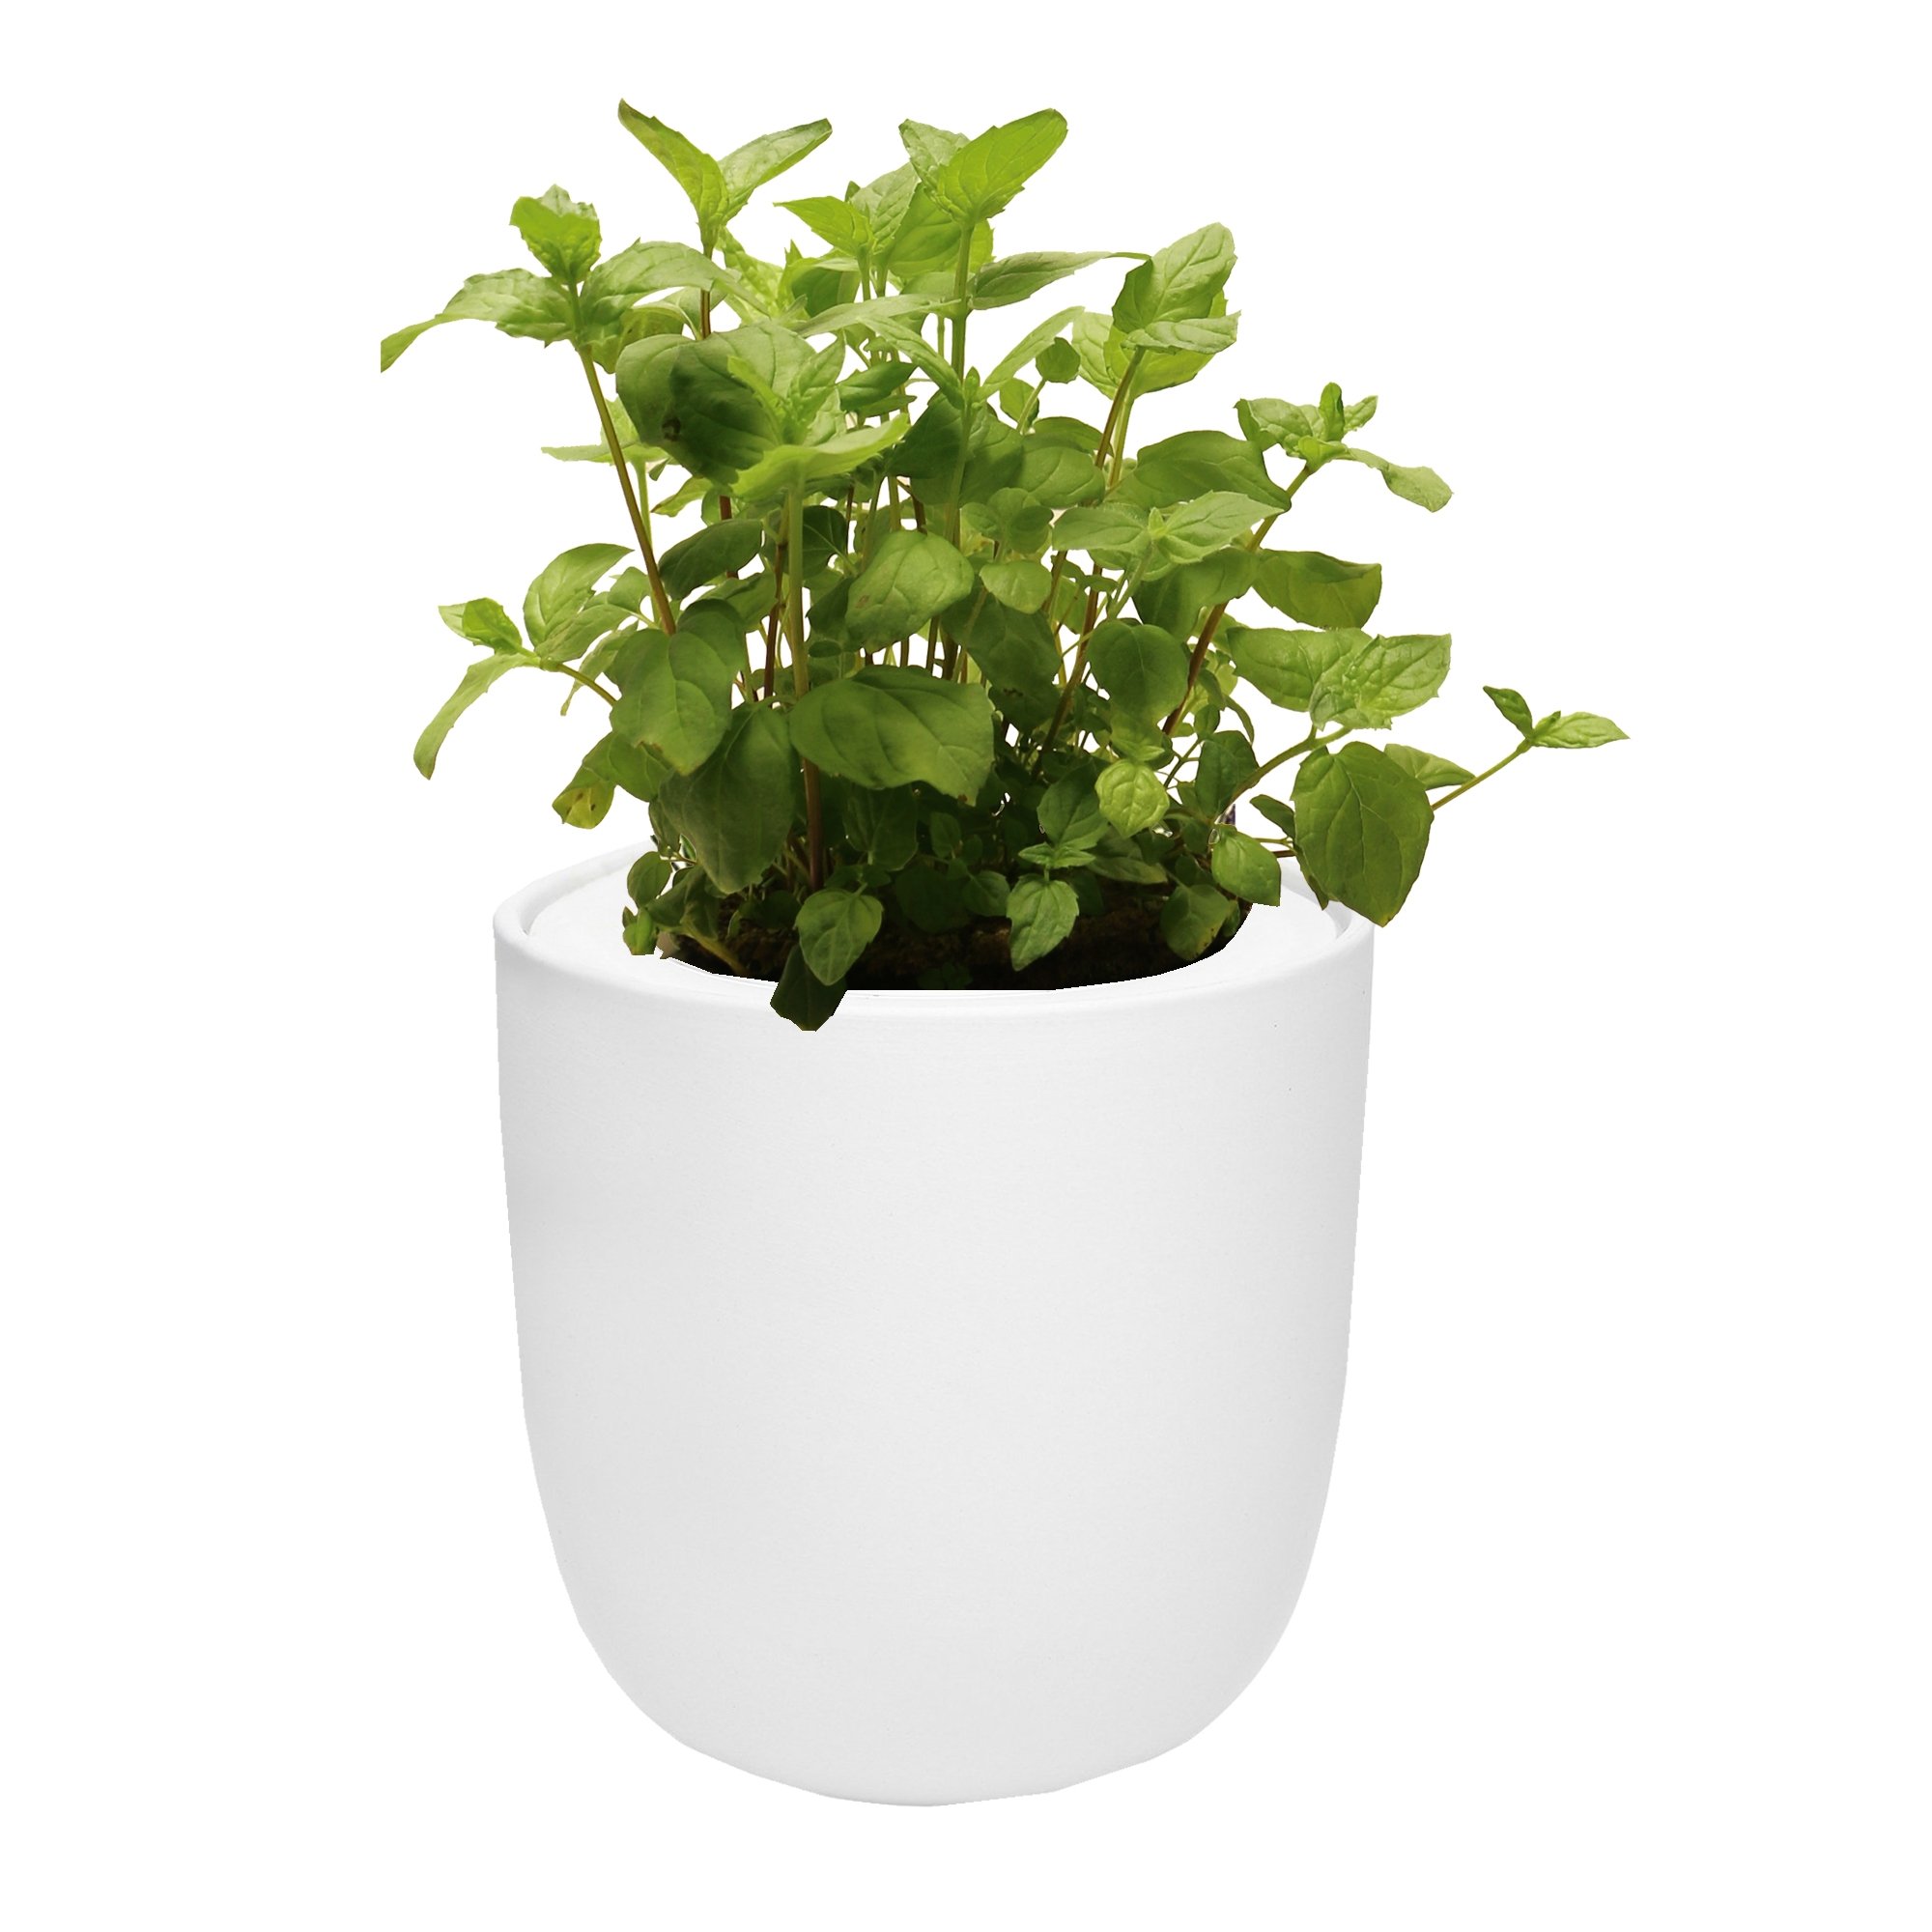 Hydroponic Herb Growing Kit With White Ceramic Pot and Organic Seeds (Peppermint)